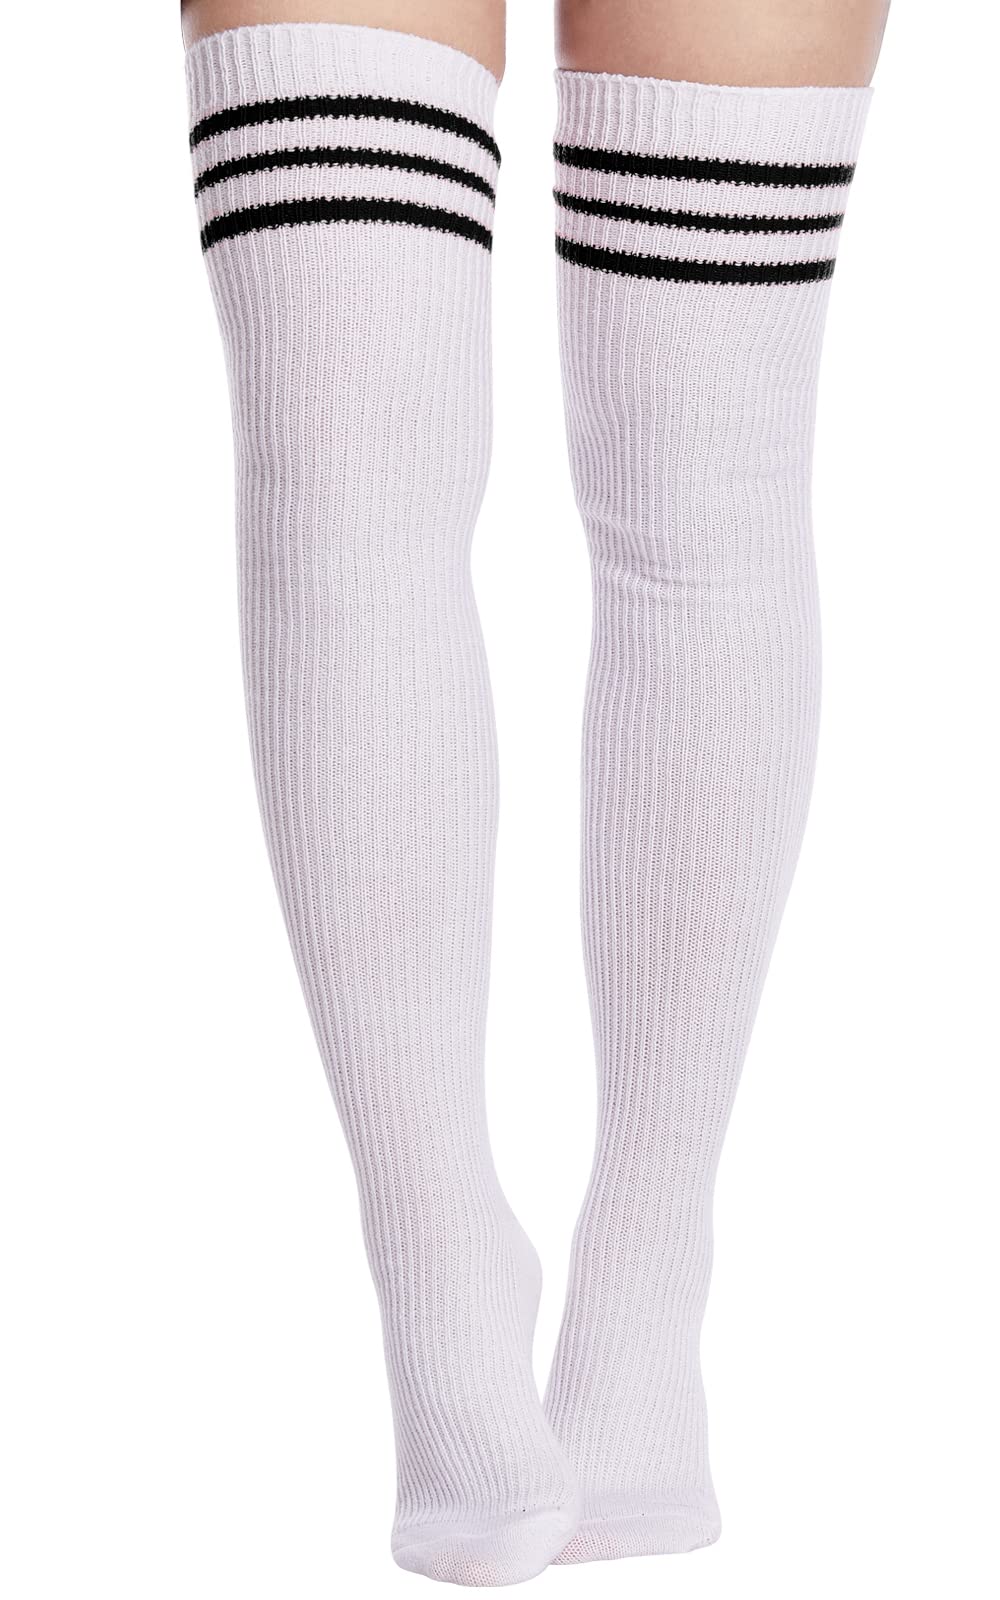 Extra Long Warm Knit Striped Thigh Highs Leg Warmers-White & Black Striped - Moon Wood